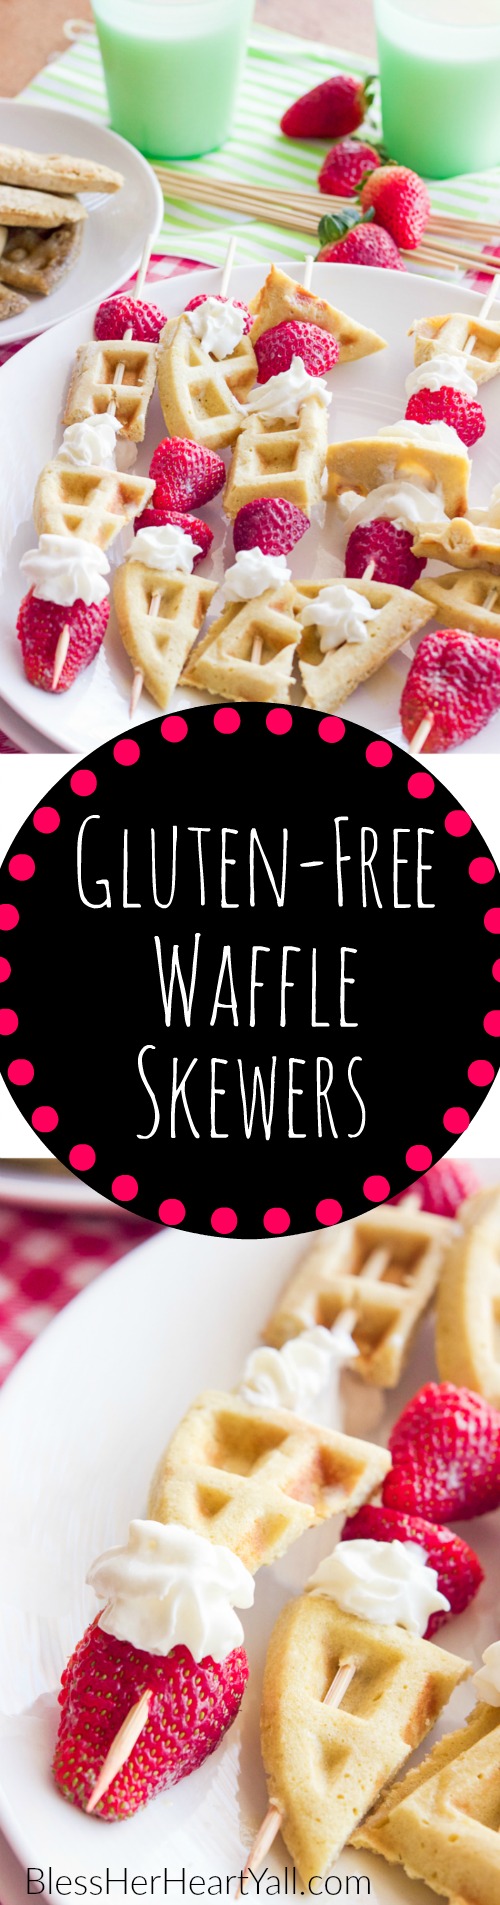 These gluten-free waffle skewers make breakfast fun and tasty.  The sweet brown sugar waffles go great with fresh berries and creamy whipped cream.  And the best part?  Breakfast is on a stick!